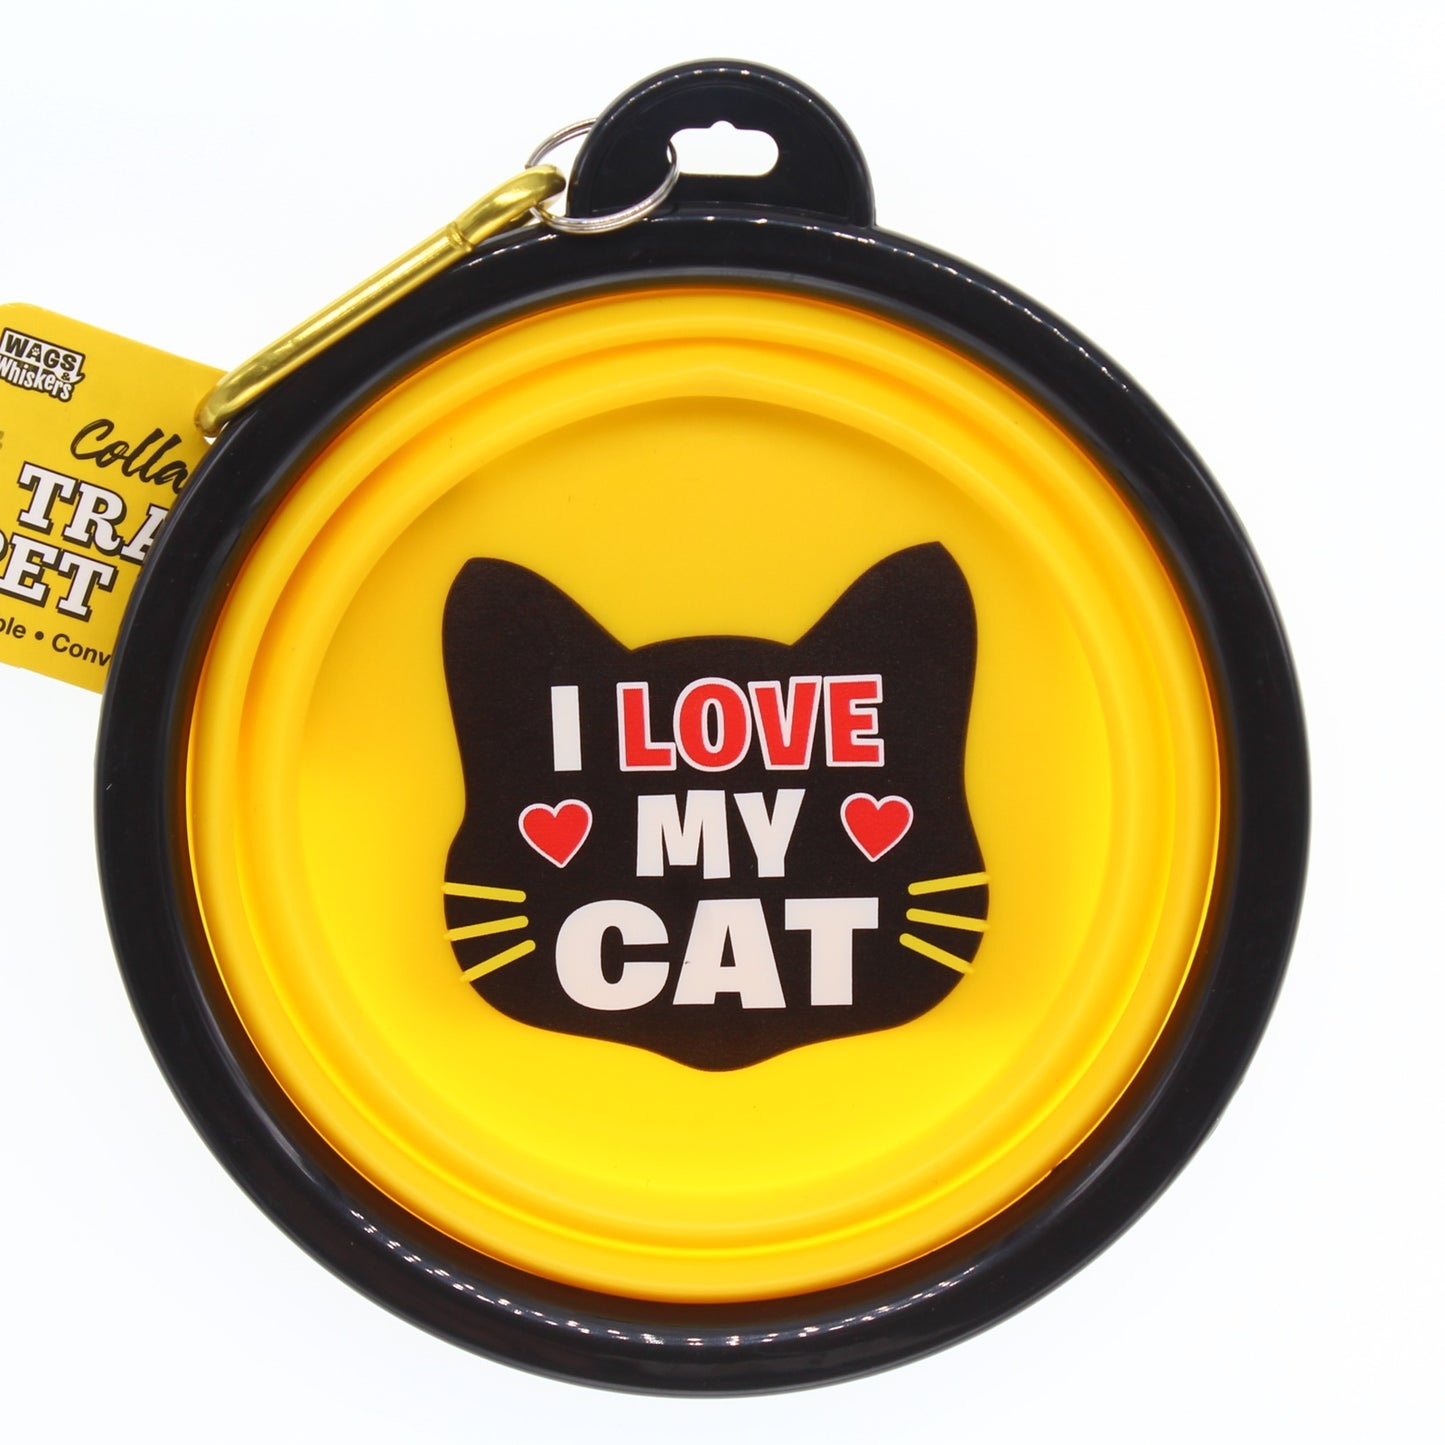 I LOVE MY CAT COLLAPSIBLE TRAVEL DOG BOWL GIFT